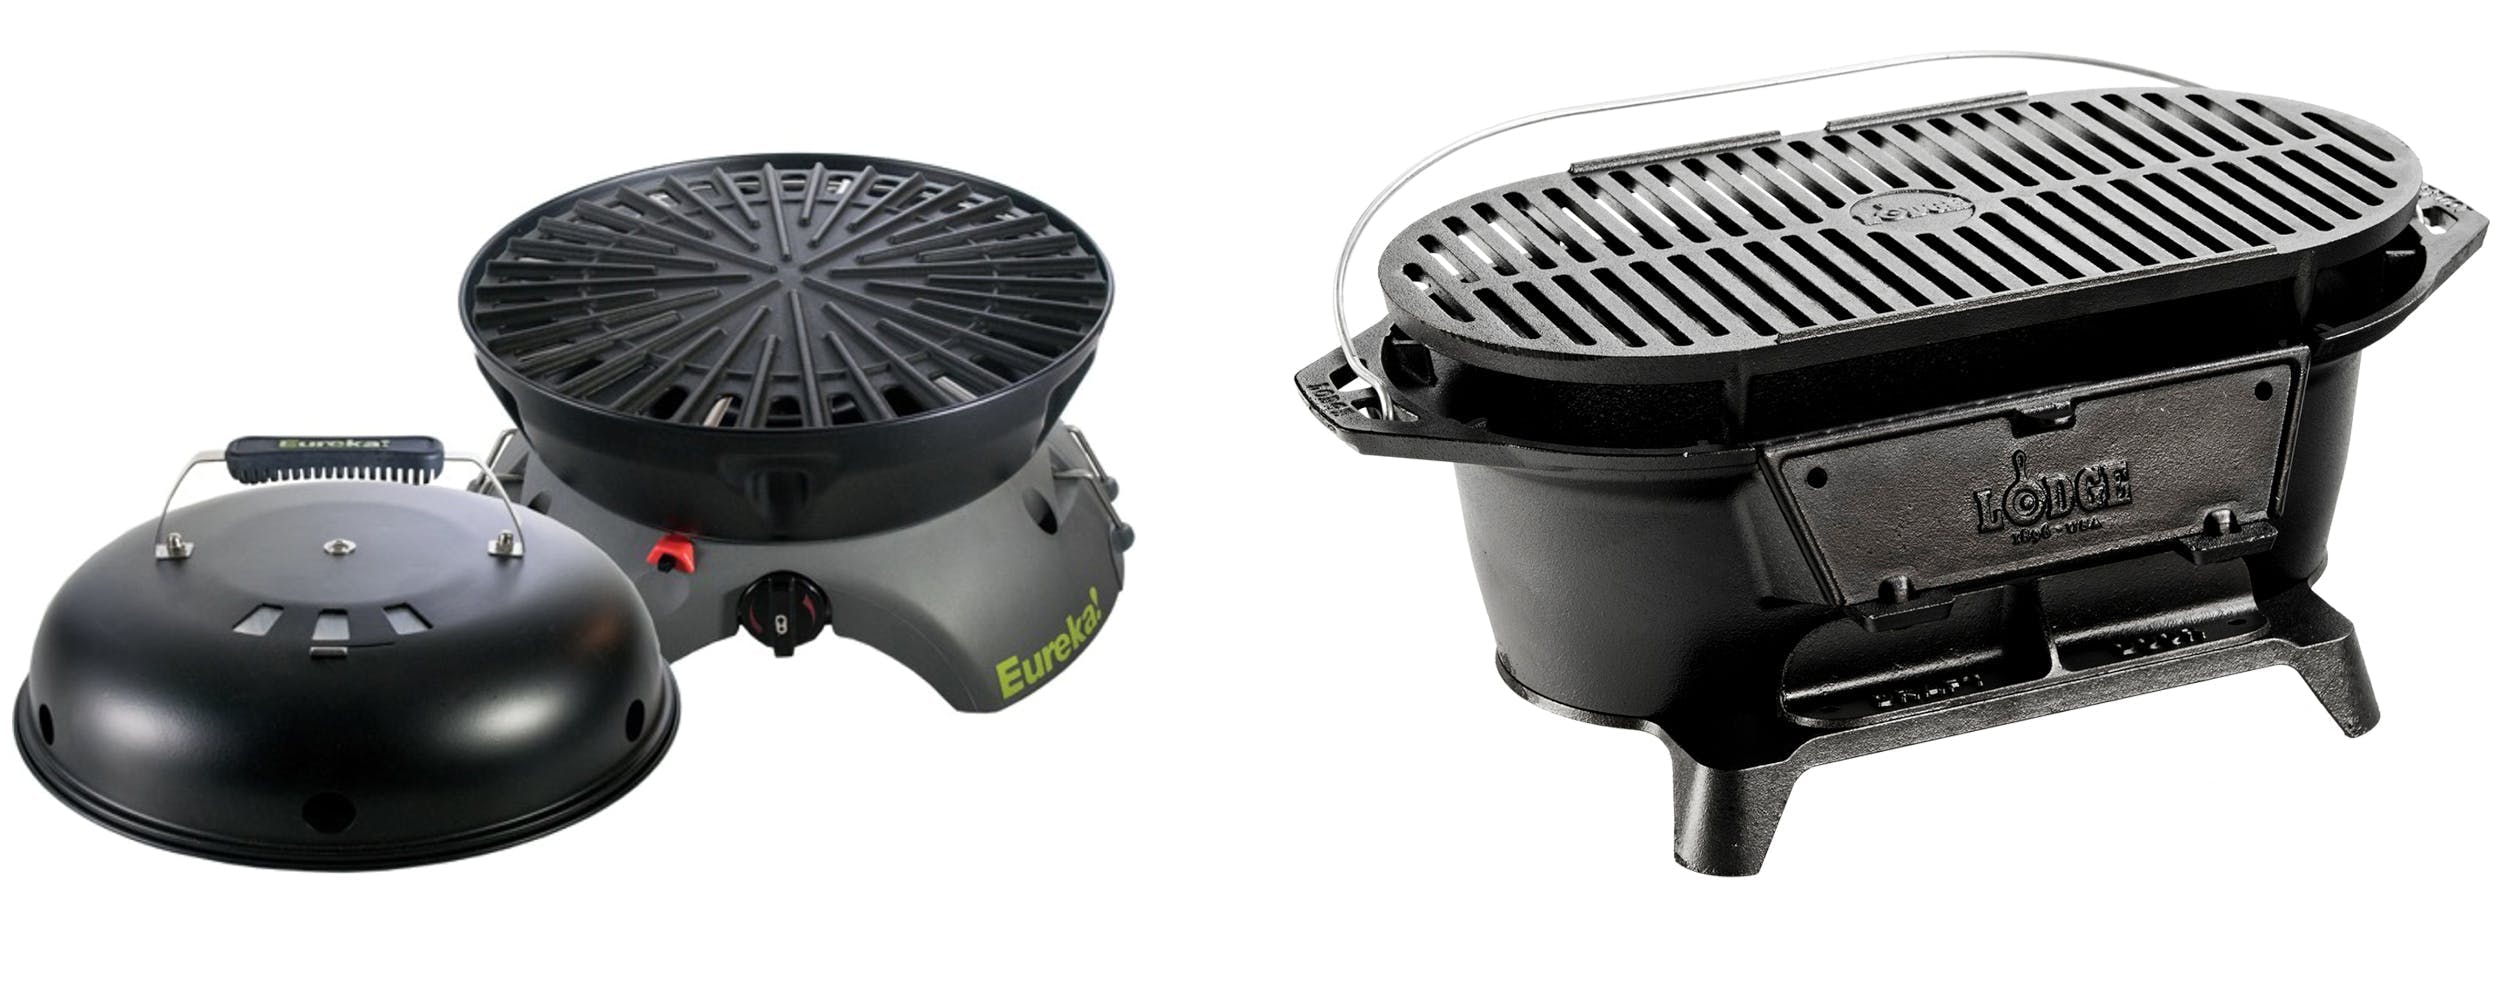 Two types of camping grills